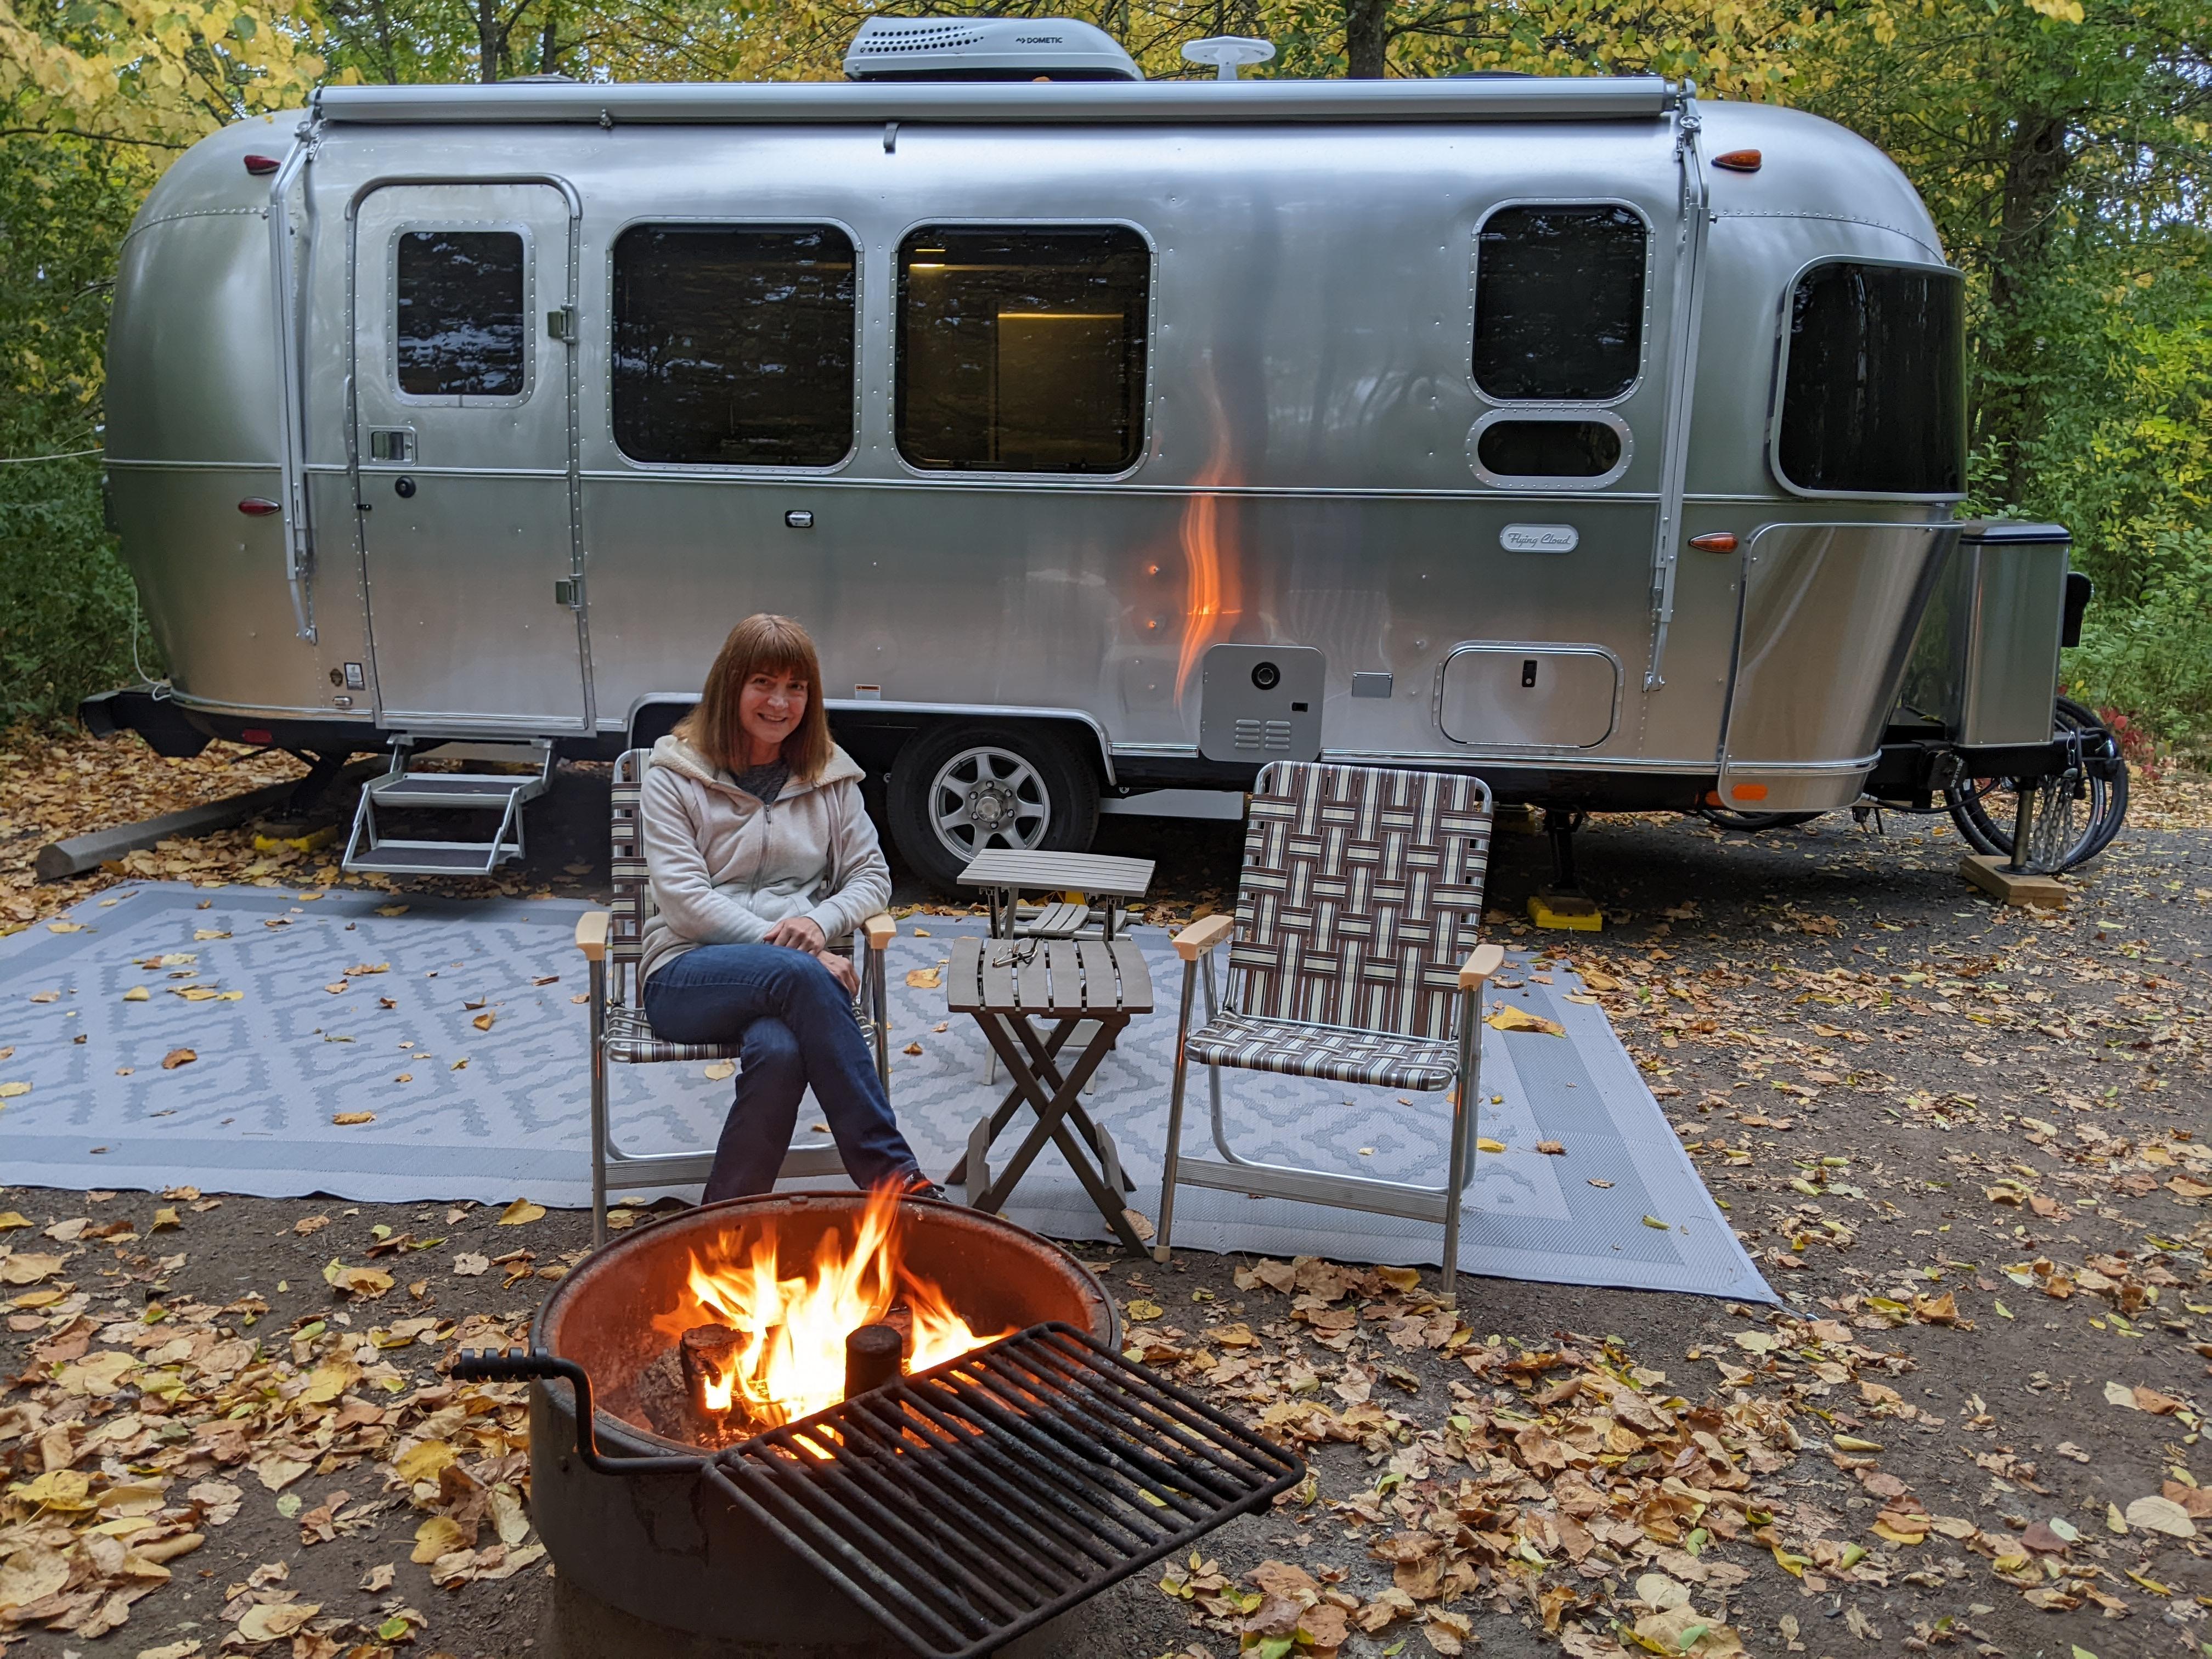 Sherron Winter Gaughan: We love to go camping at the Minnesota State Parks!